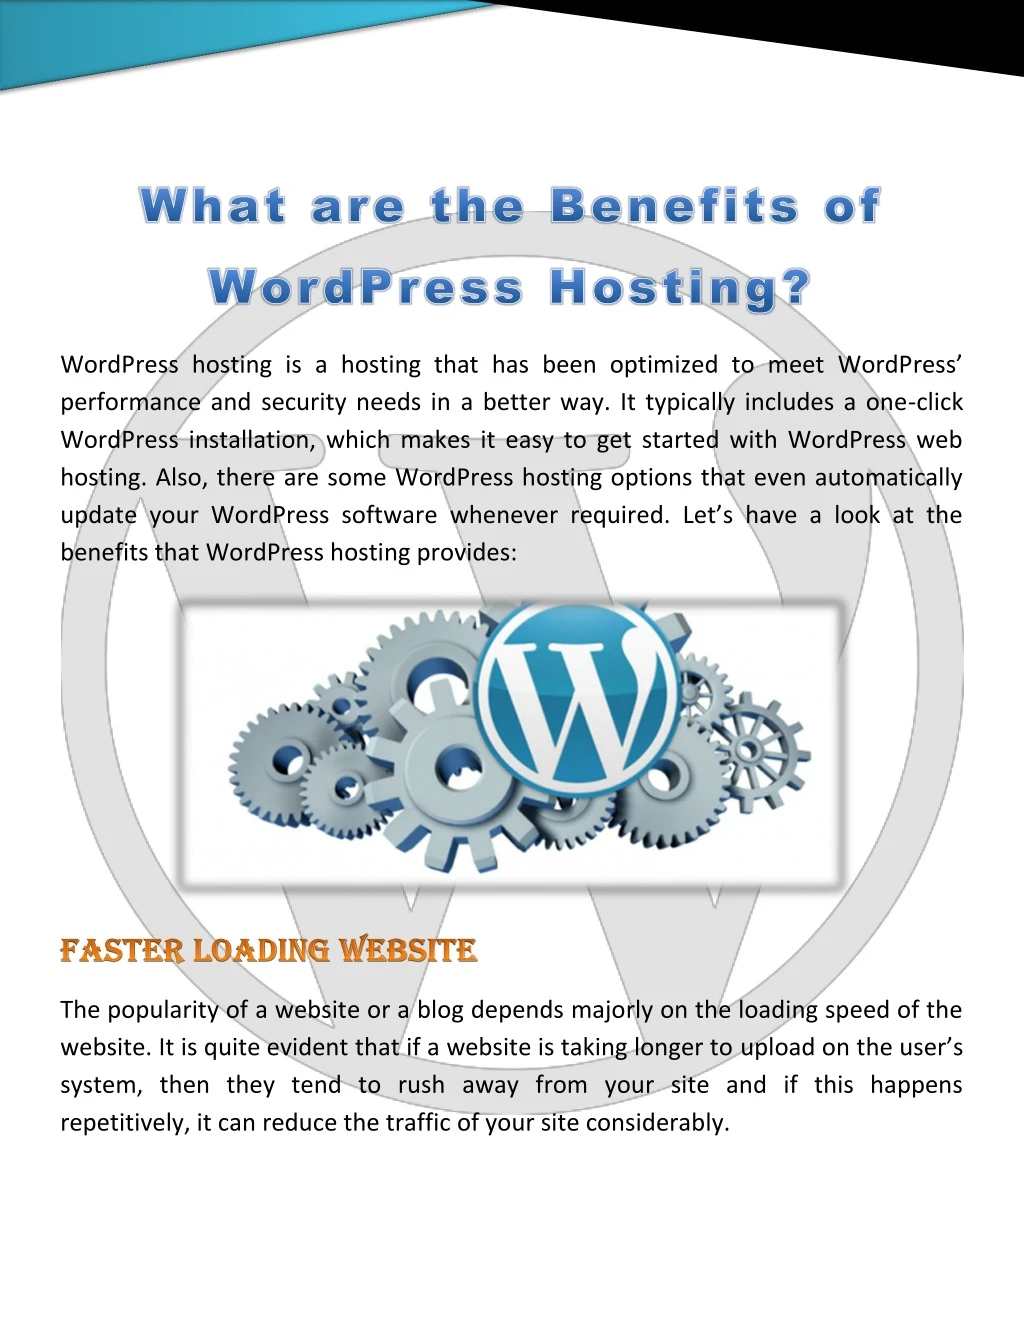 wordpress hosting is a hosting that has been